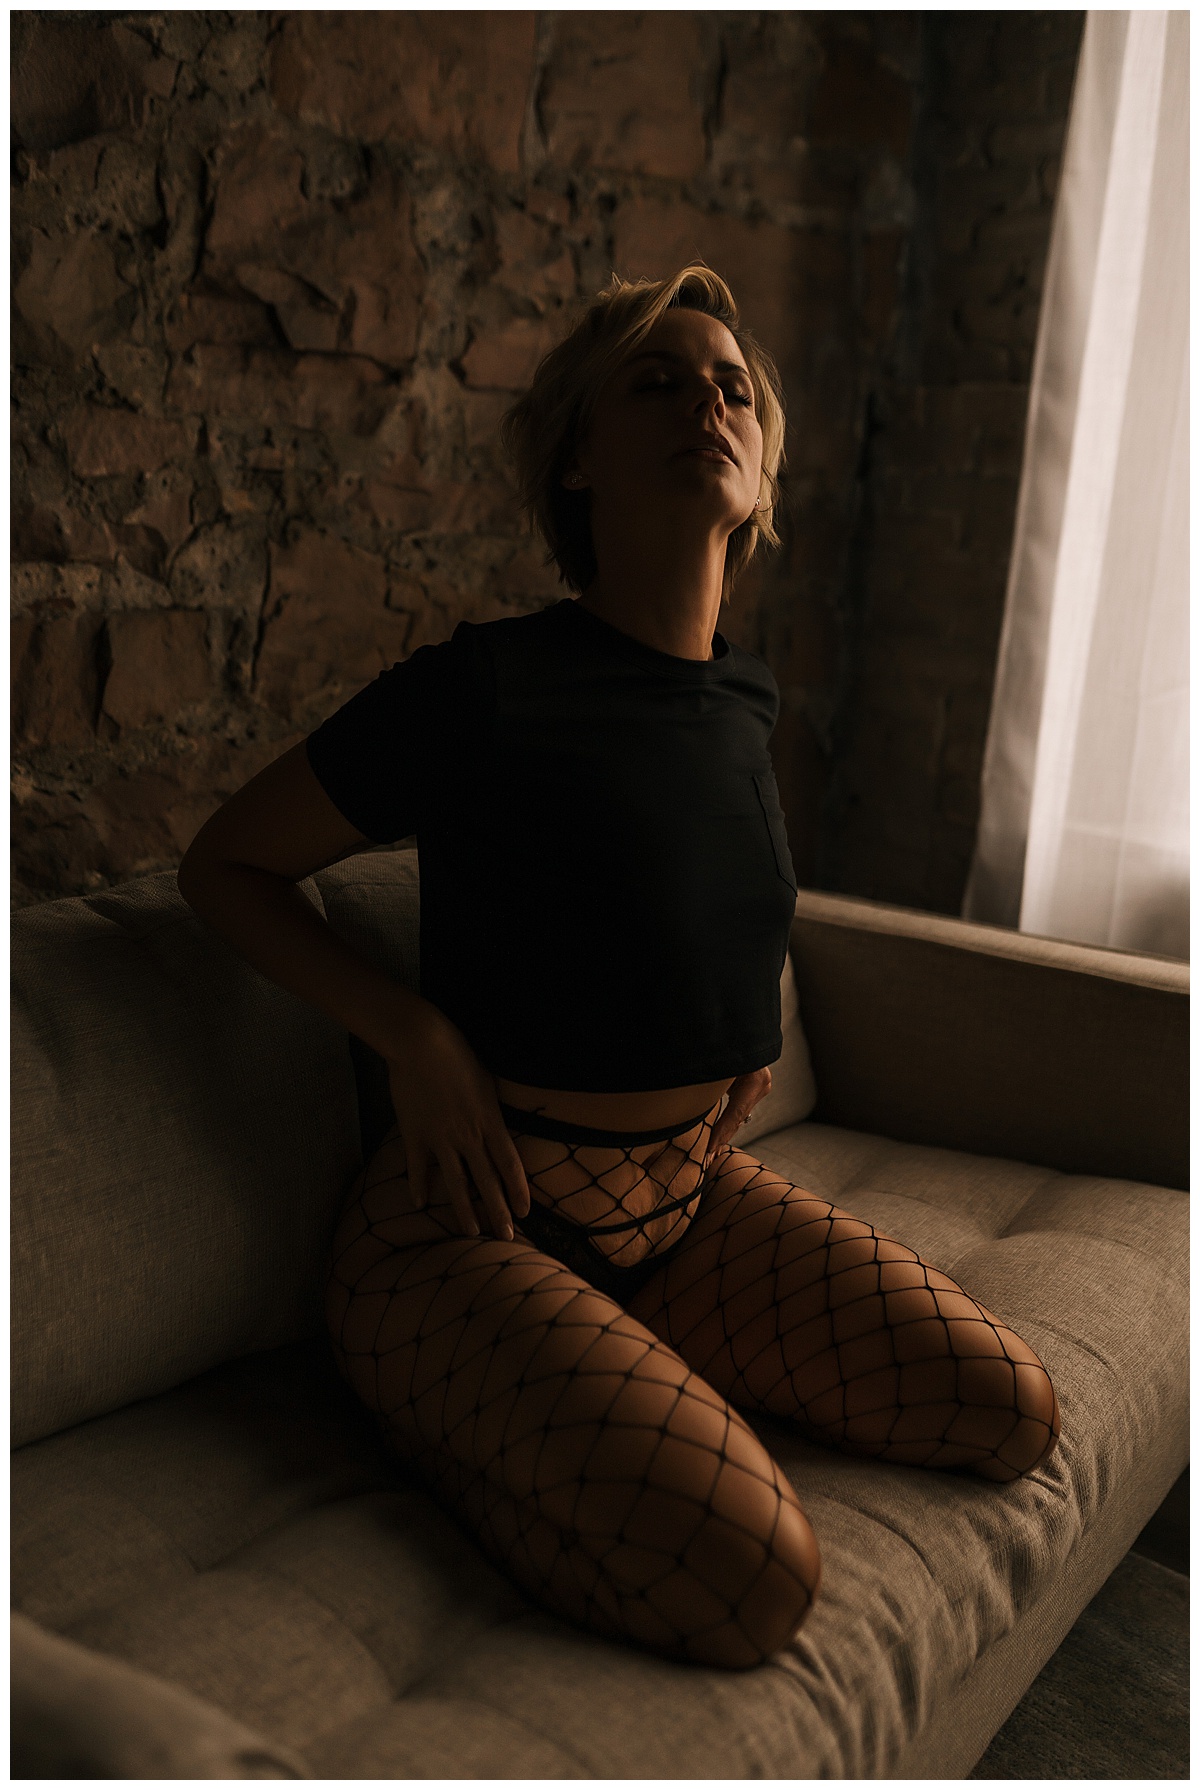 Woman sits on edge of couch Wearing Fishnets